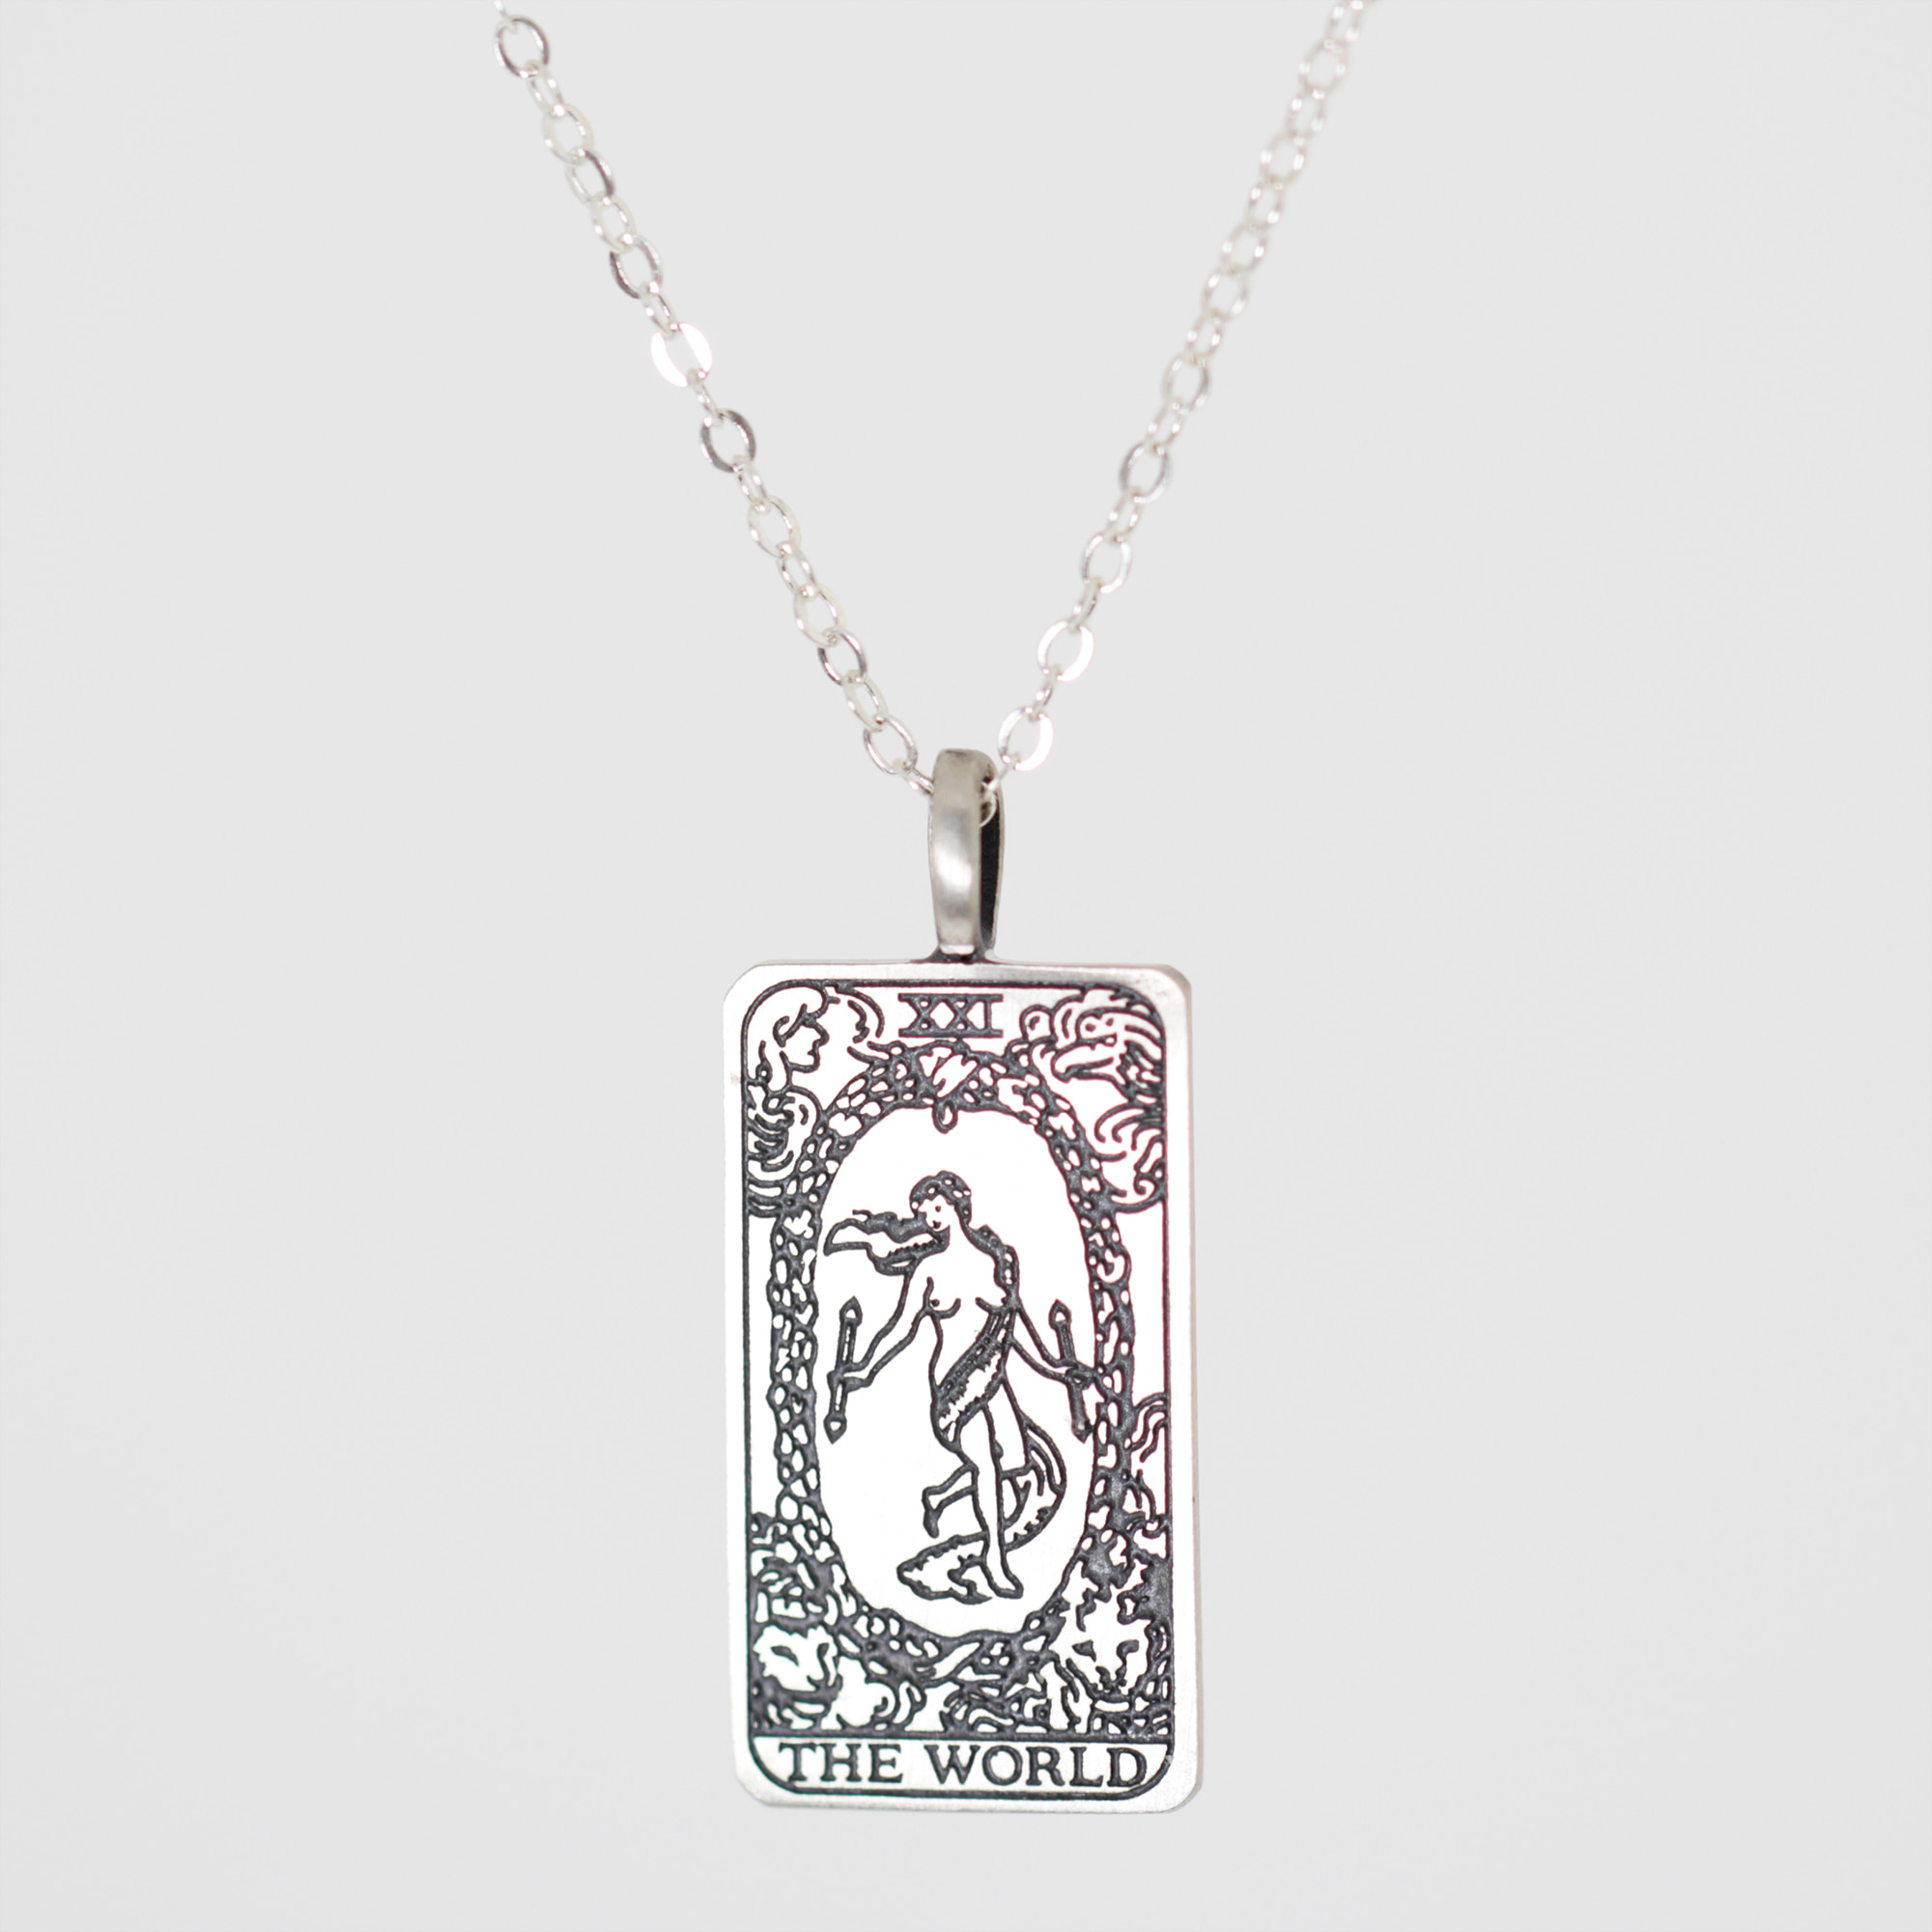 The world tarot necklace 14k white gold